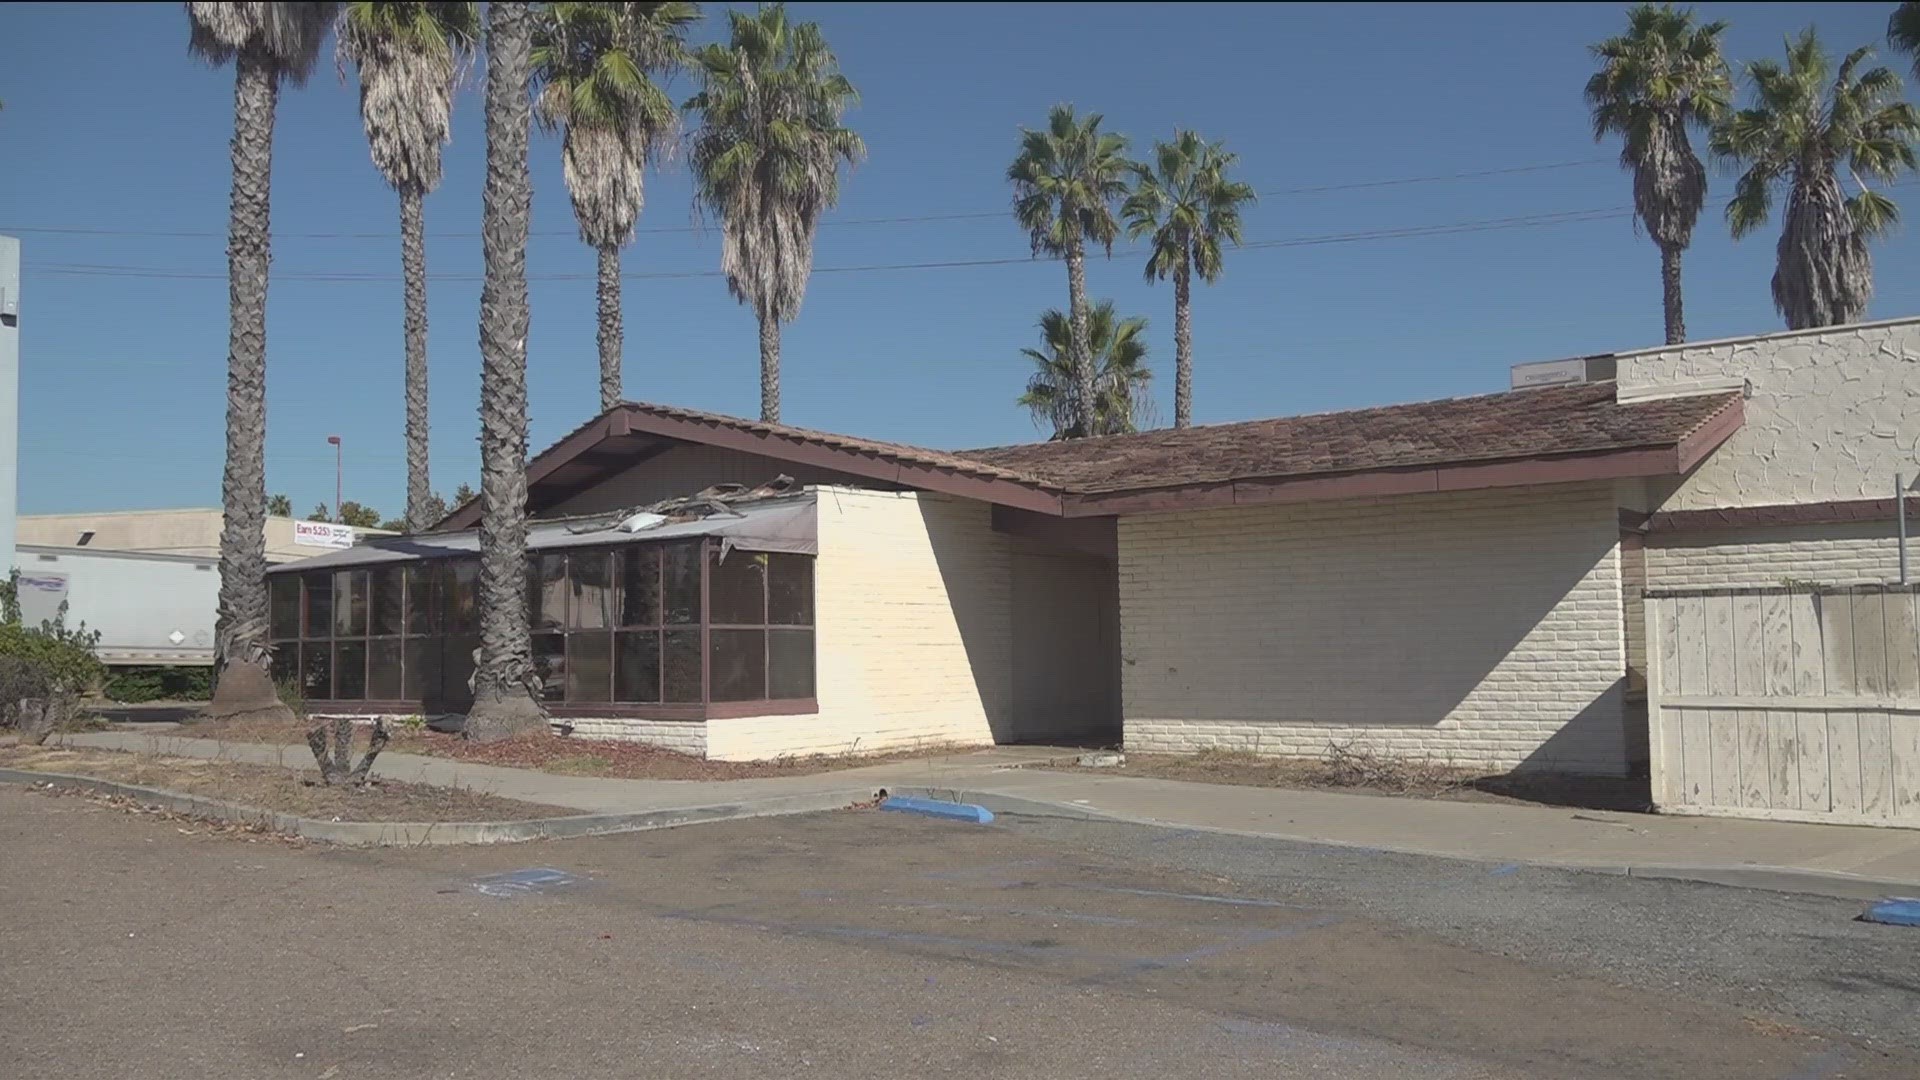 CBS 8 learned the windows were recently boarded up with wood, leaving no way out for the animals.